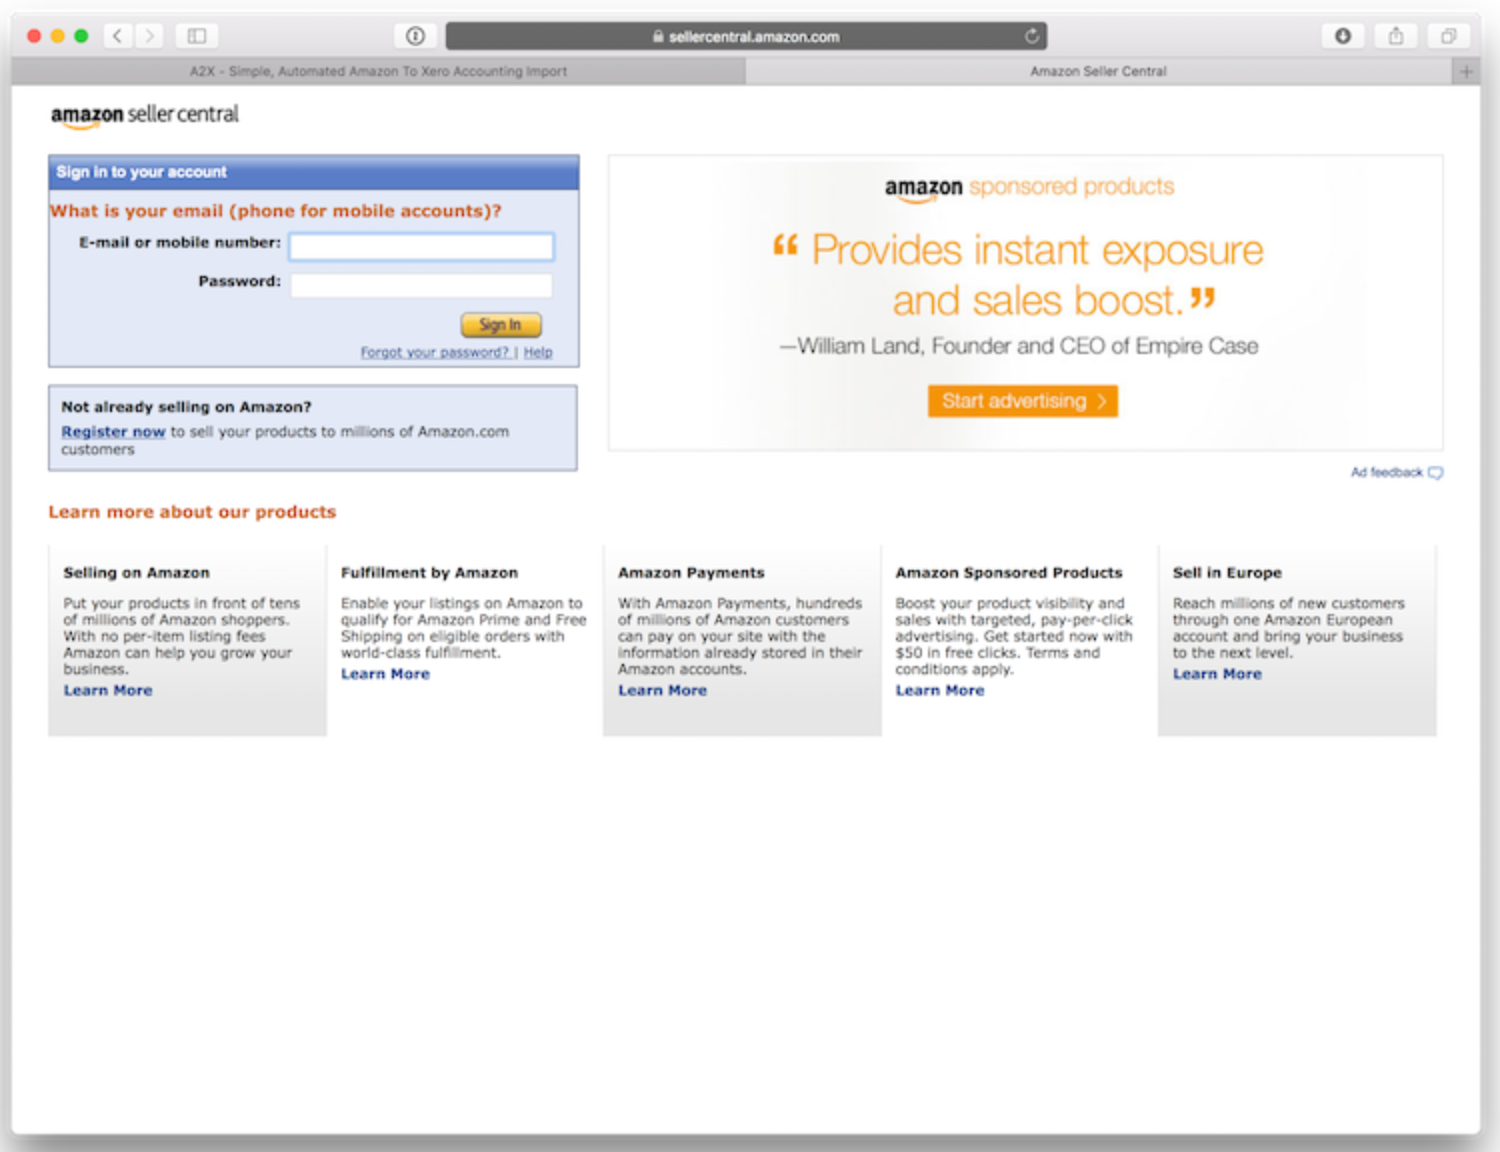 Screenshot showing the login page for Amazon Seller Central